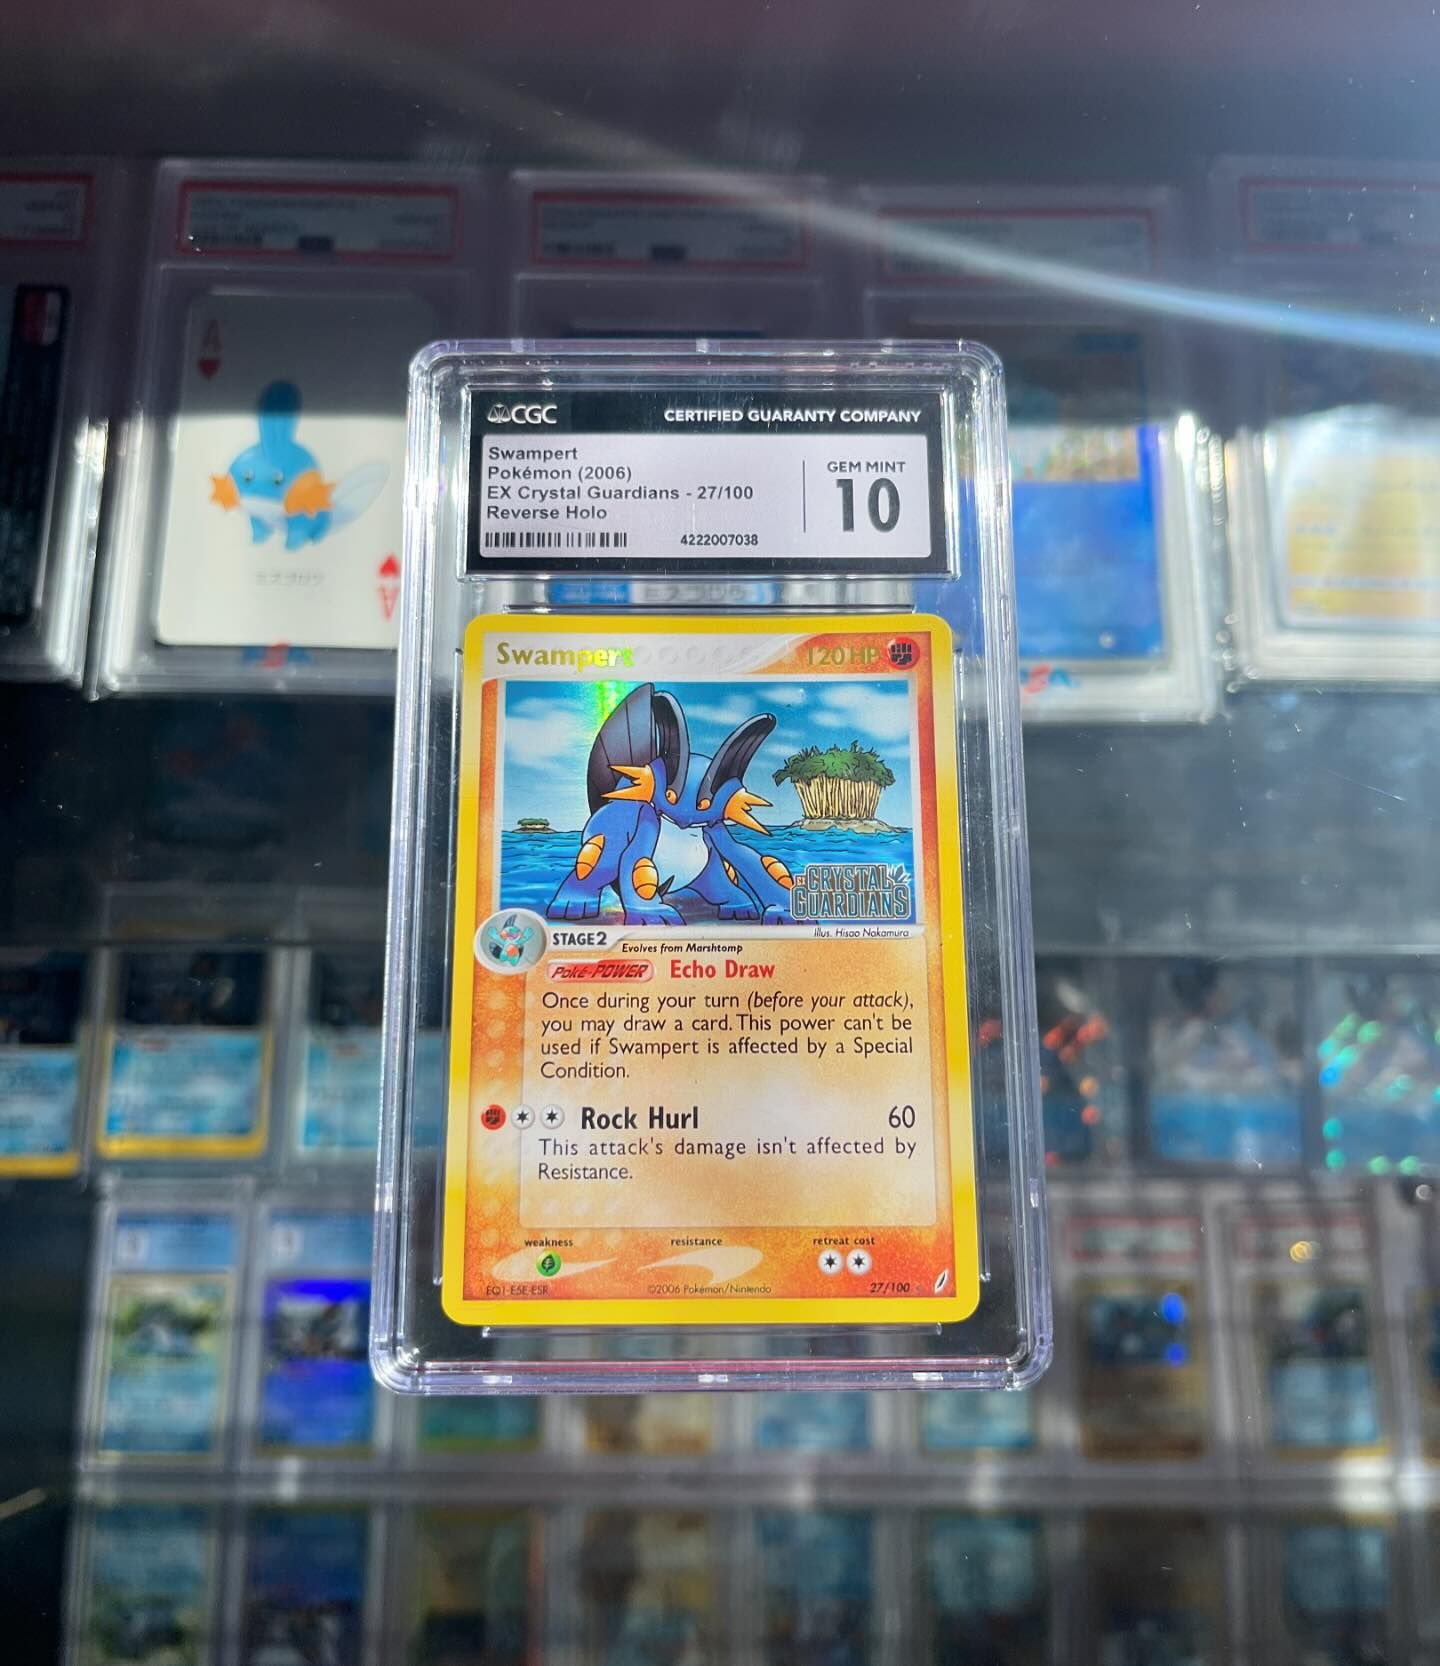 Swampert 
EX Crystal Guardians
Picked this up at the LA Collect-Con 
Big Thanks to @dbrtradingllc for the Awesome Sale 
😸👏🏼🫶🏼

#pokemoncommunity #pokemoncards #pokémon #pokemon #pokemontcg